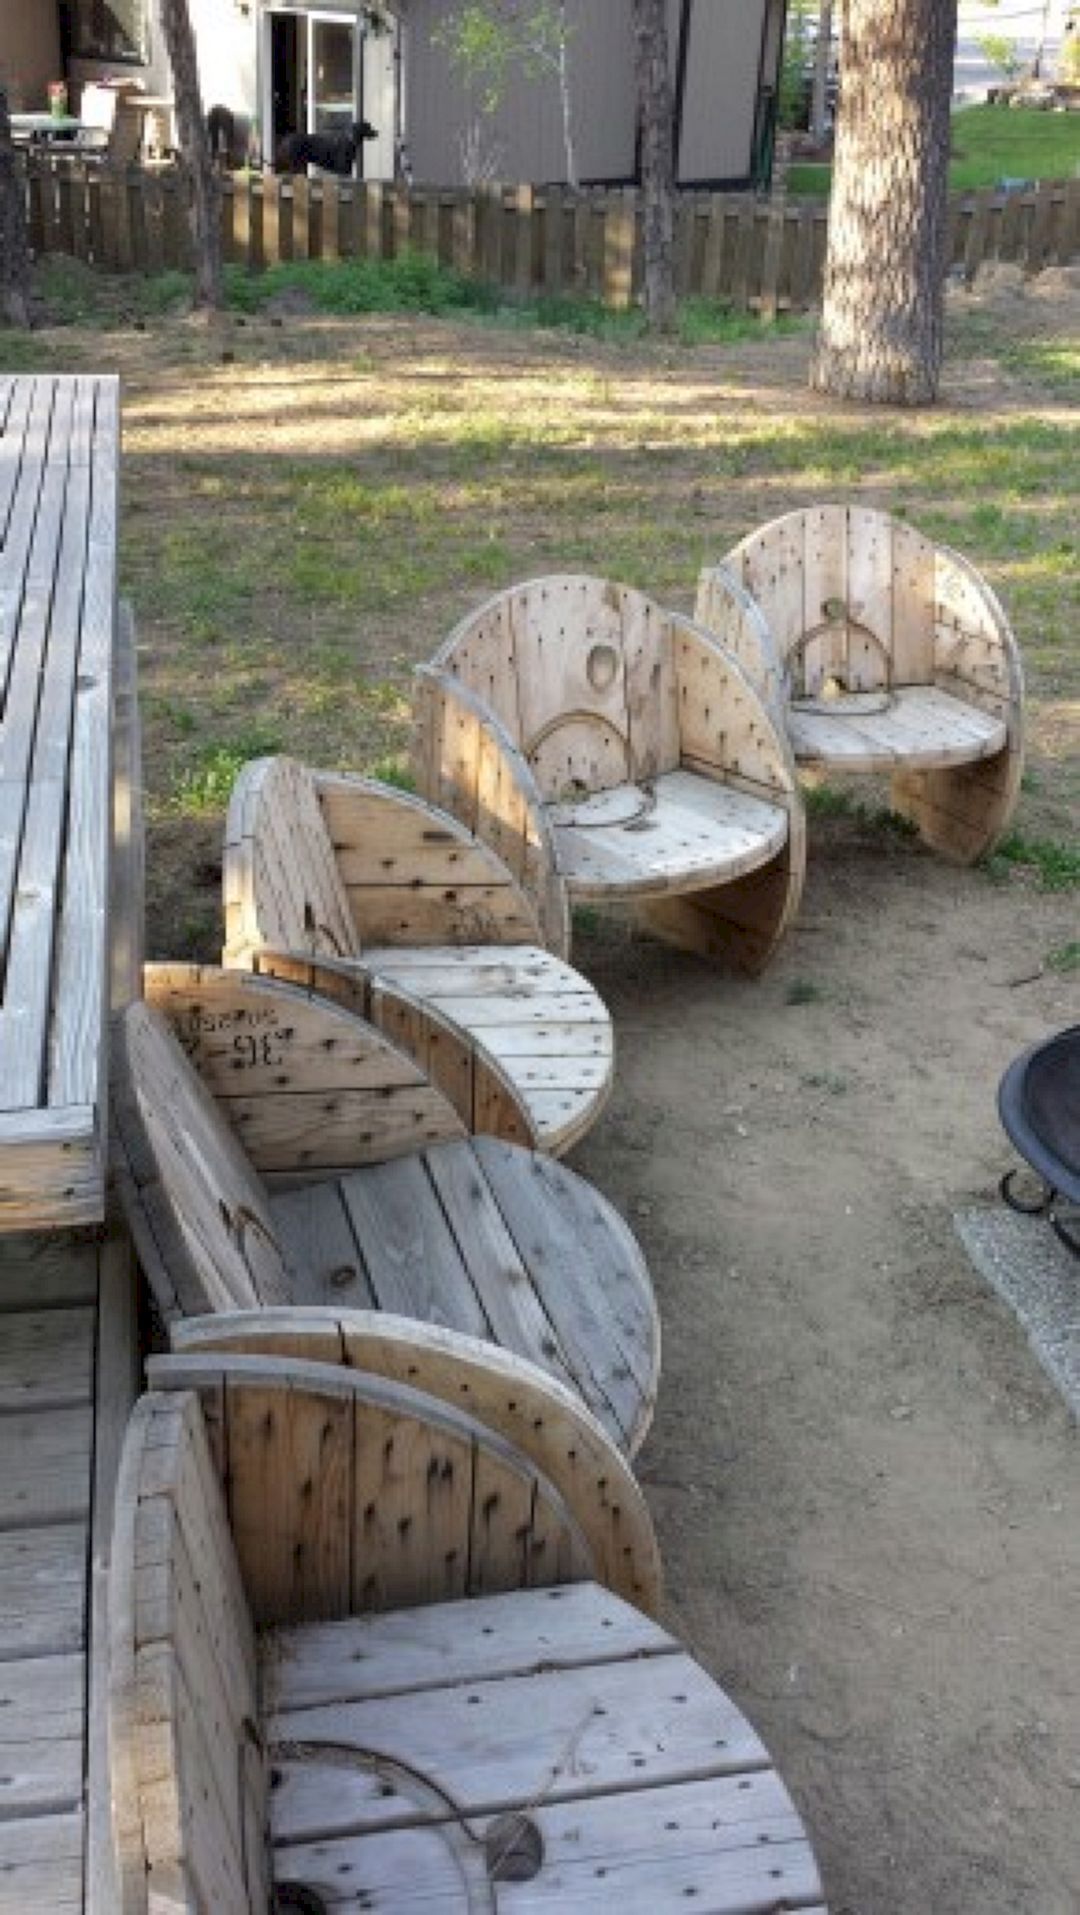 The Beauty and Durability of Wooden Garden Furniture